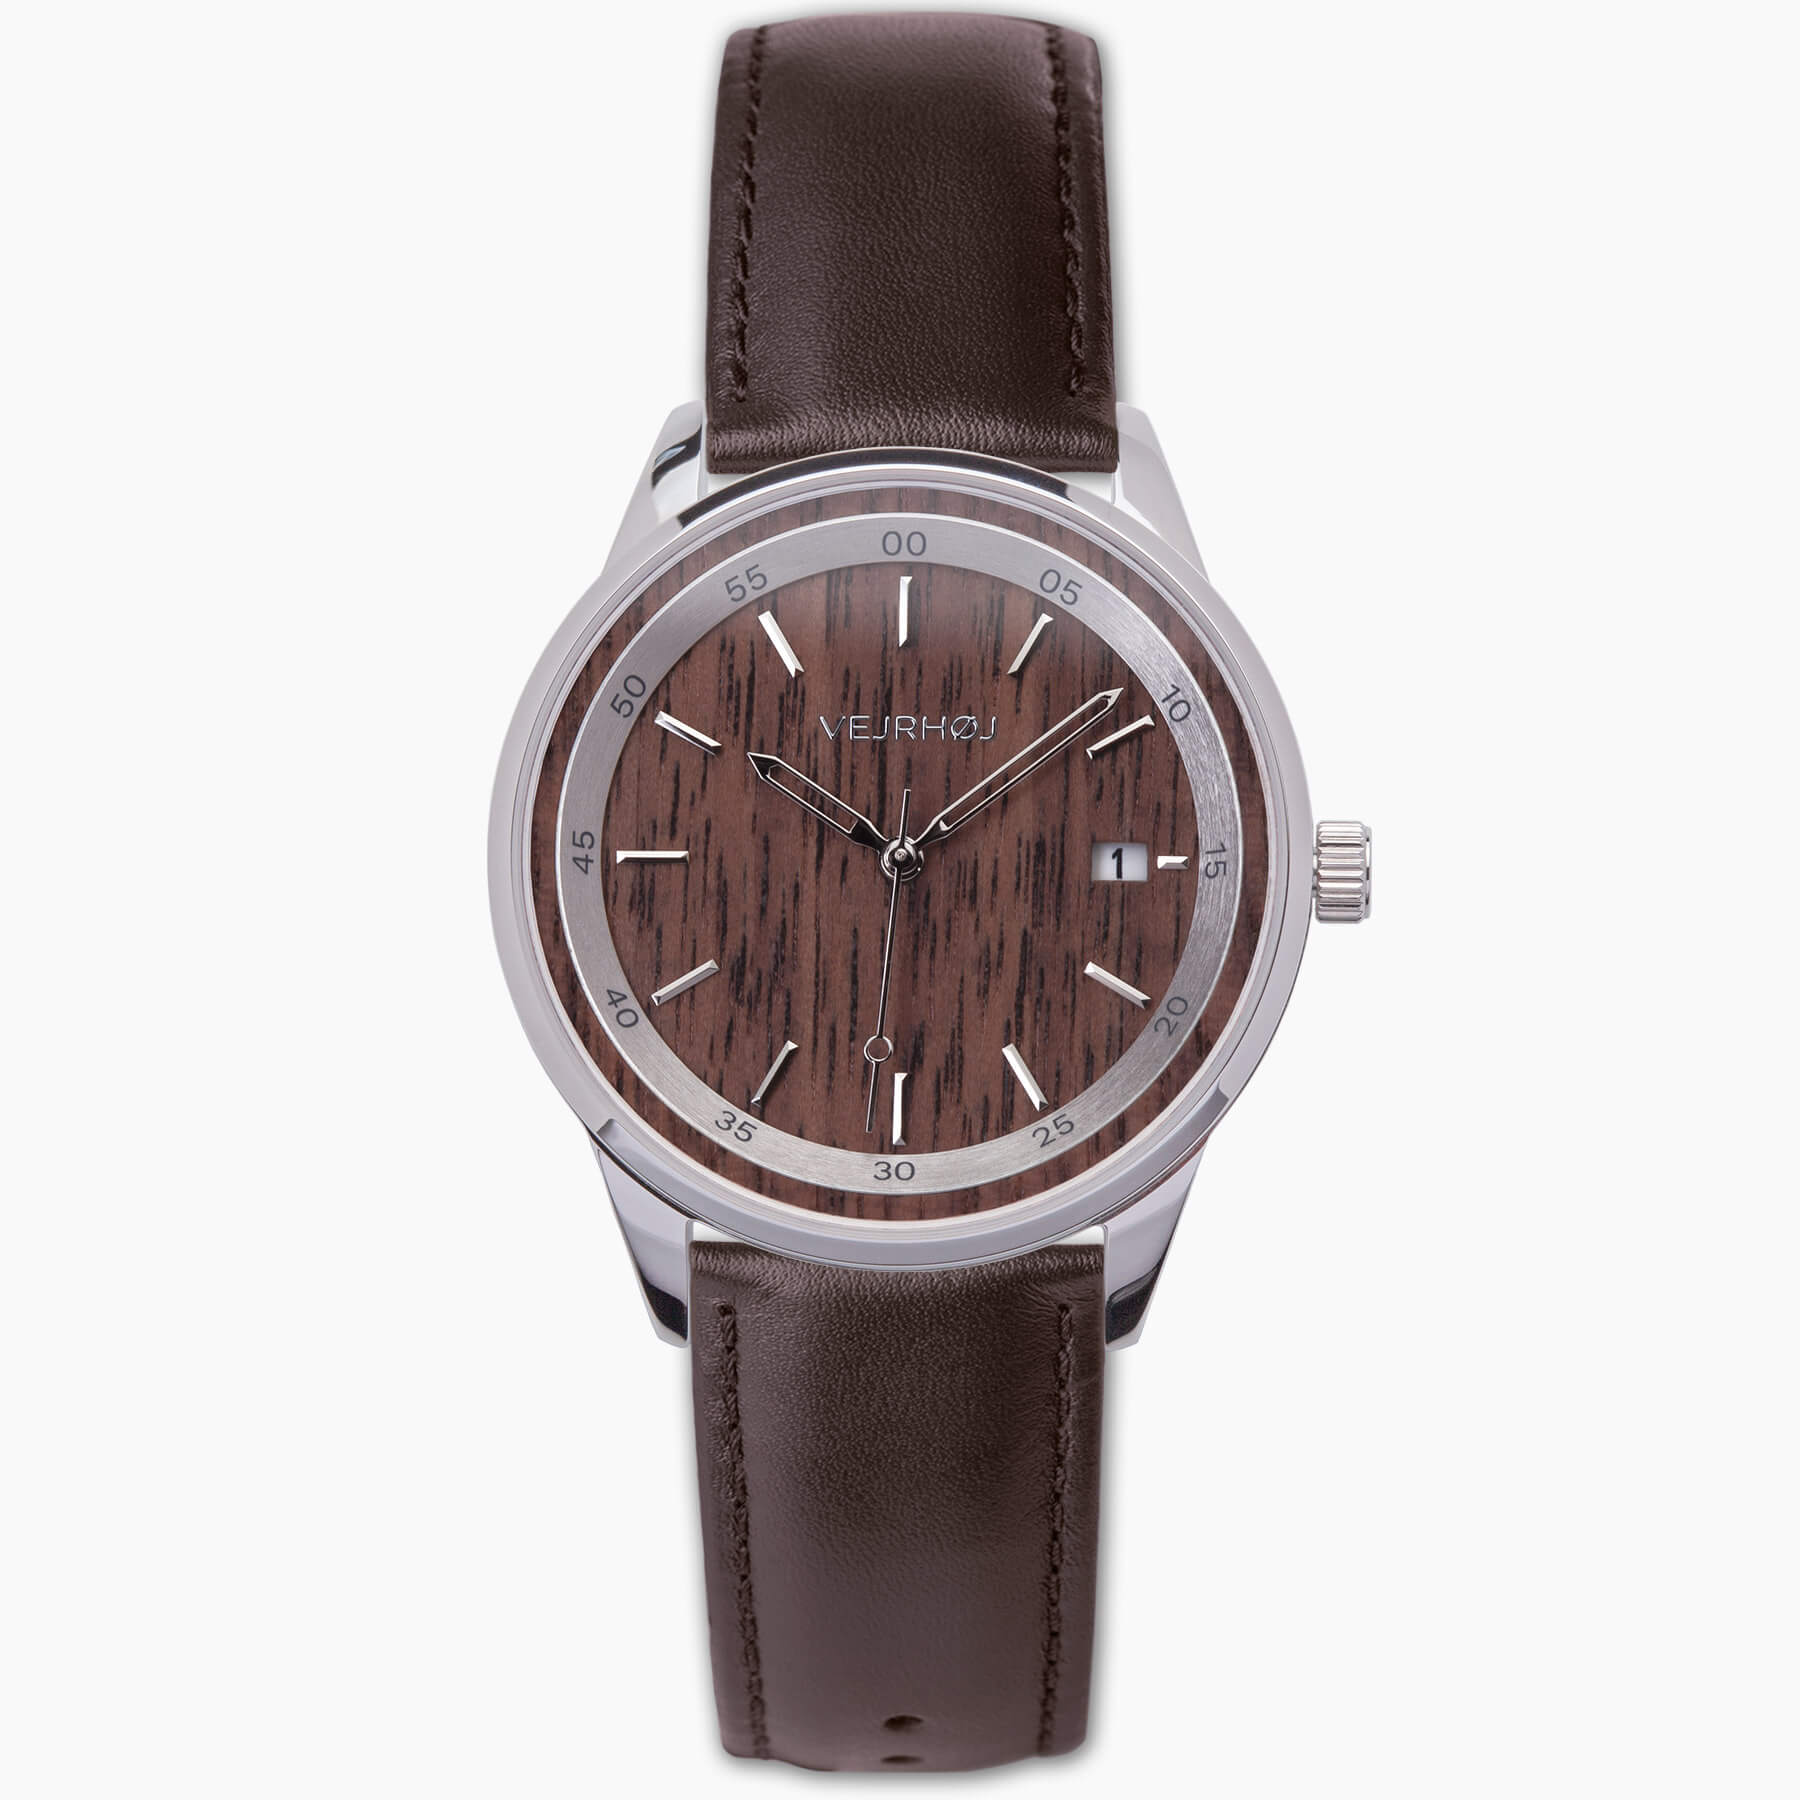 the brown automatic wrist watch from VEJRHOJ that features a combination of natural walnut wood and stainless steel casing